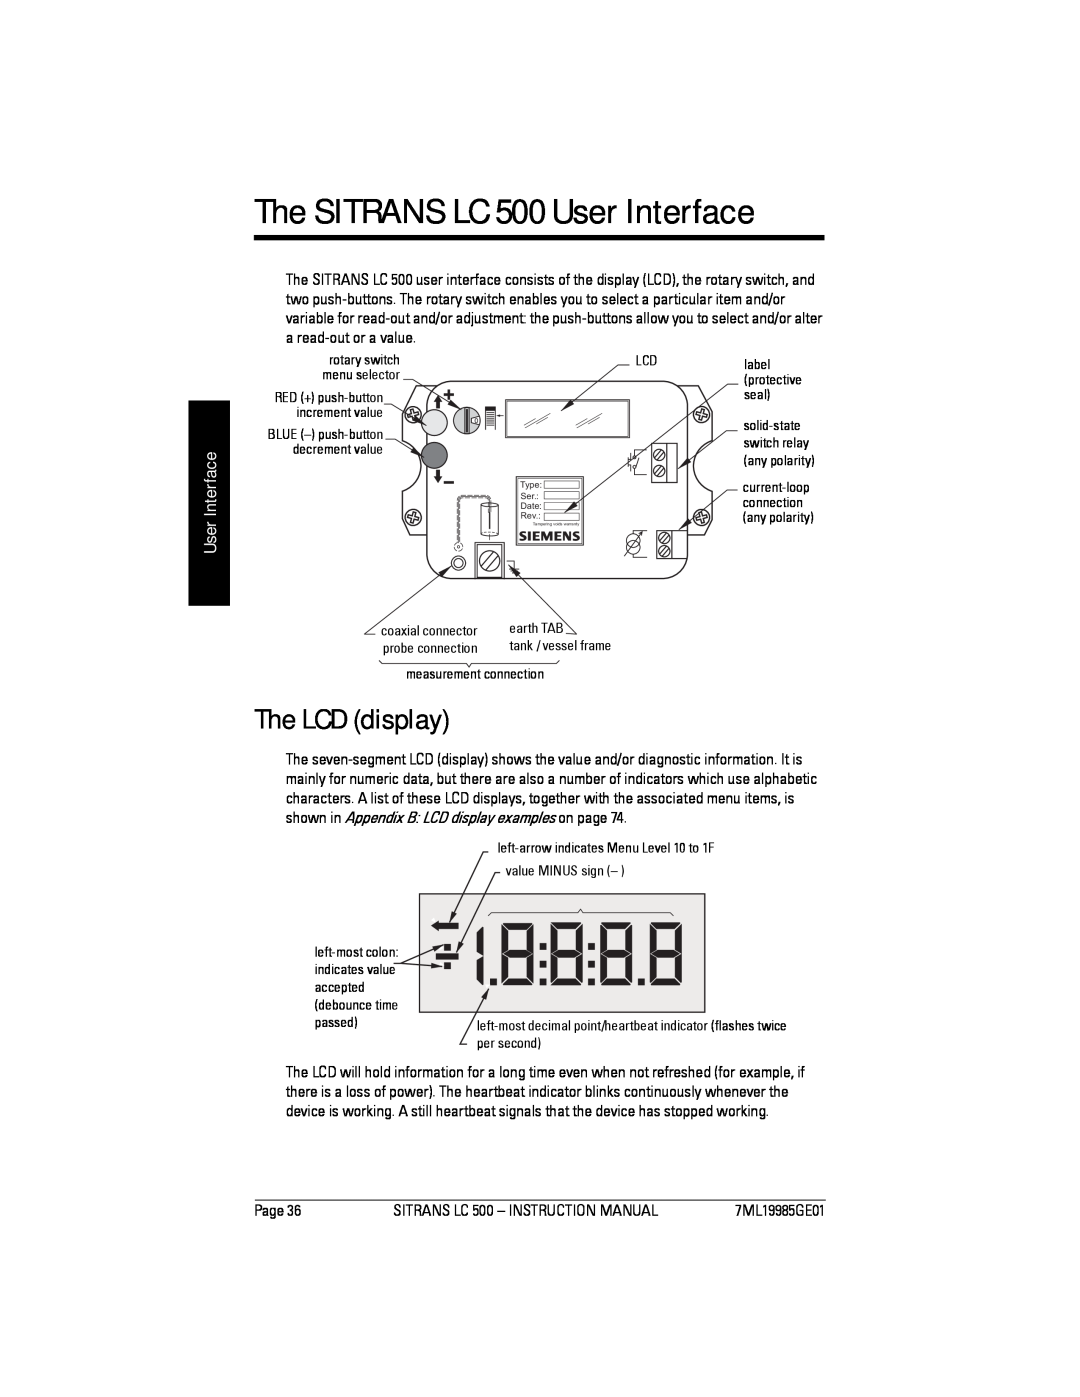 Siemens Sitrans instruction manual The SITRANS LC 500 User Interface, The LCD display 